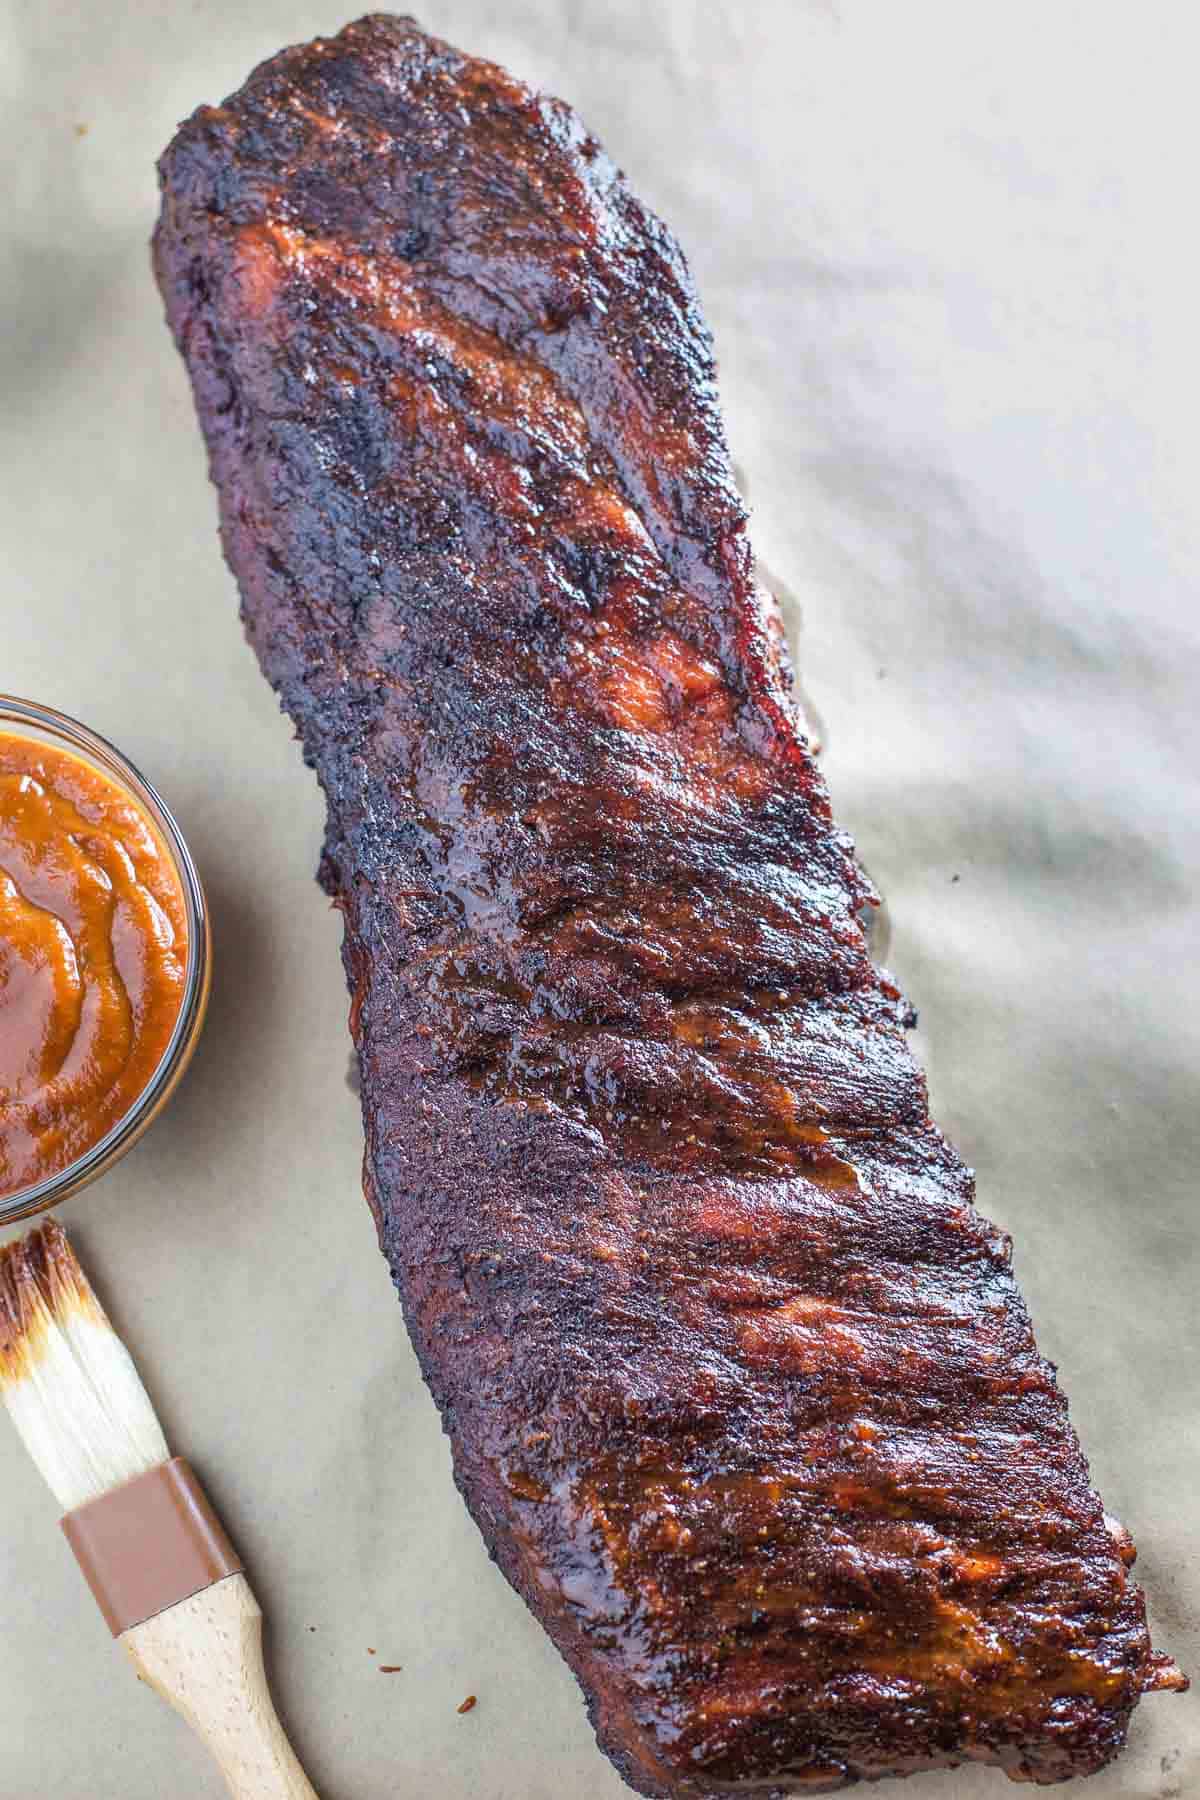 A rack of Smoked Ribs with Low Sugar BBQ Sauce before slicing